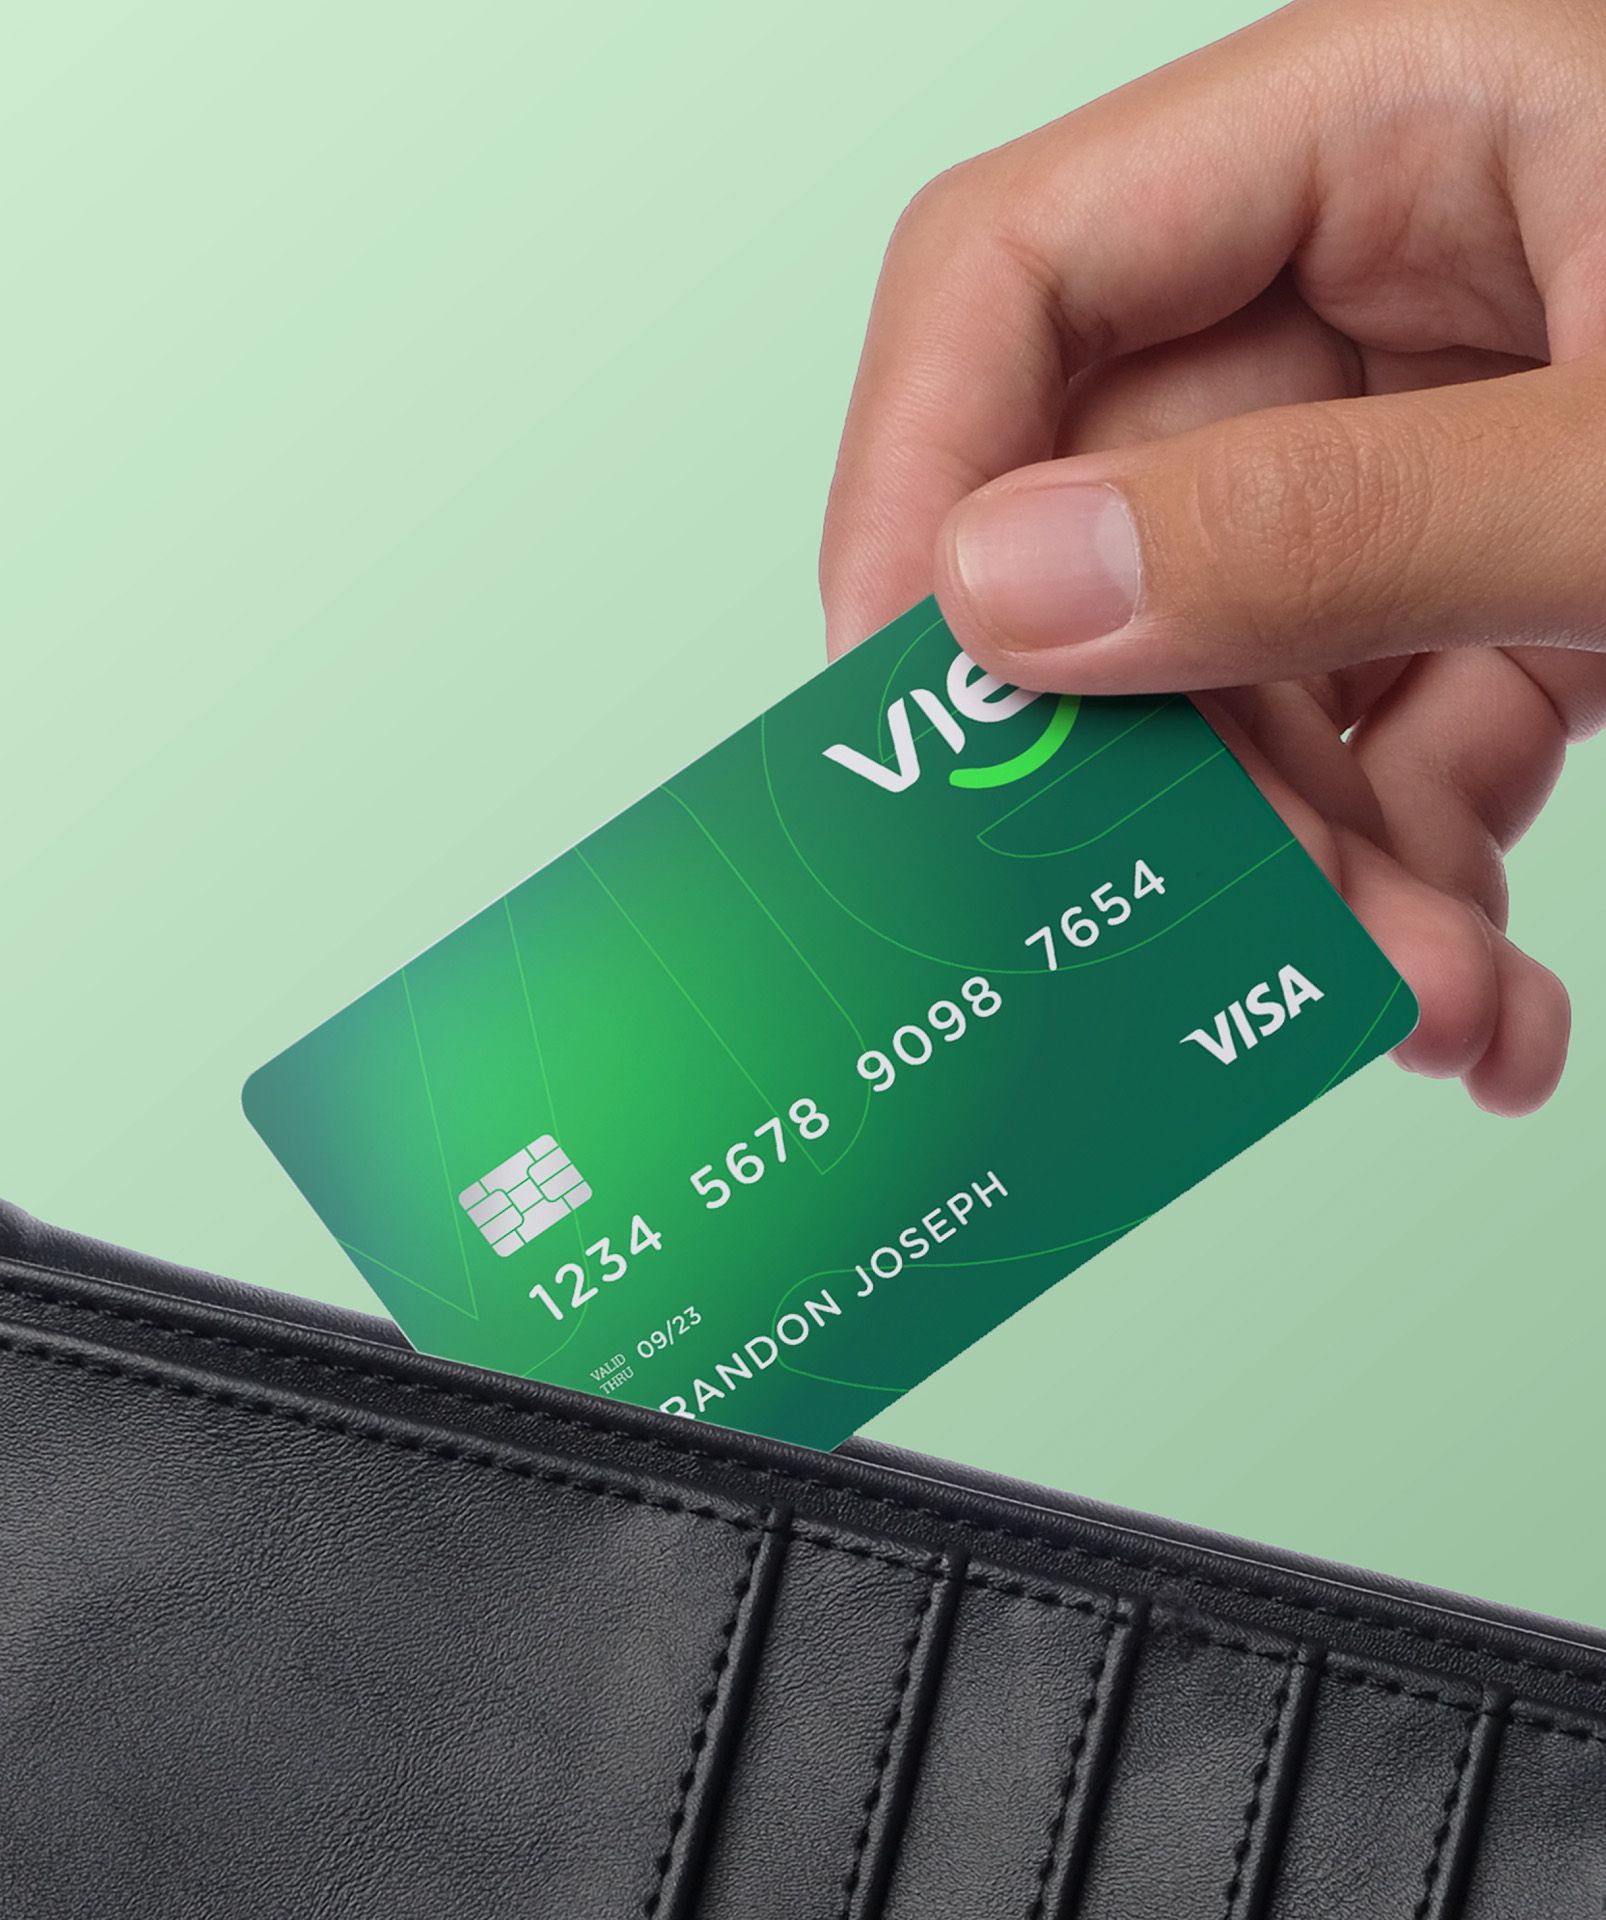 ThirdLaw branding and web design - Vie Card Cover